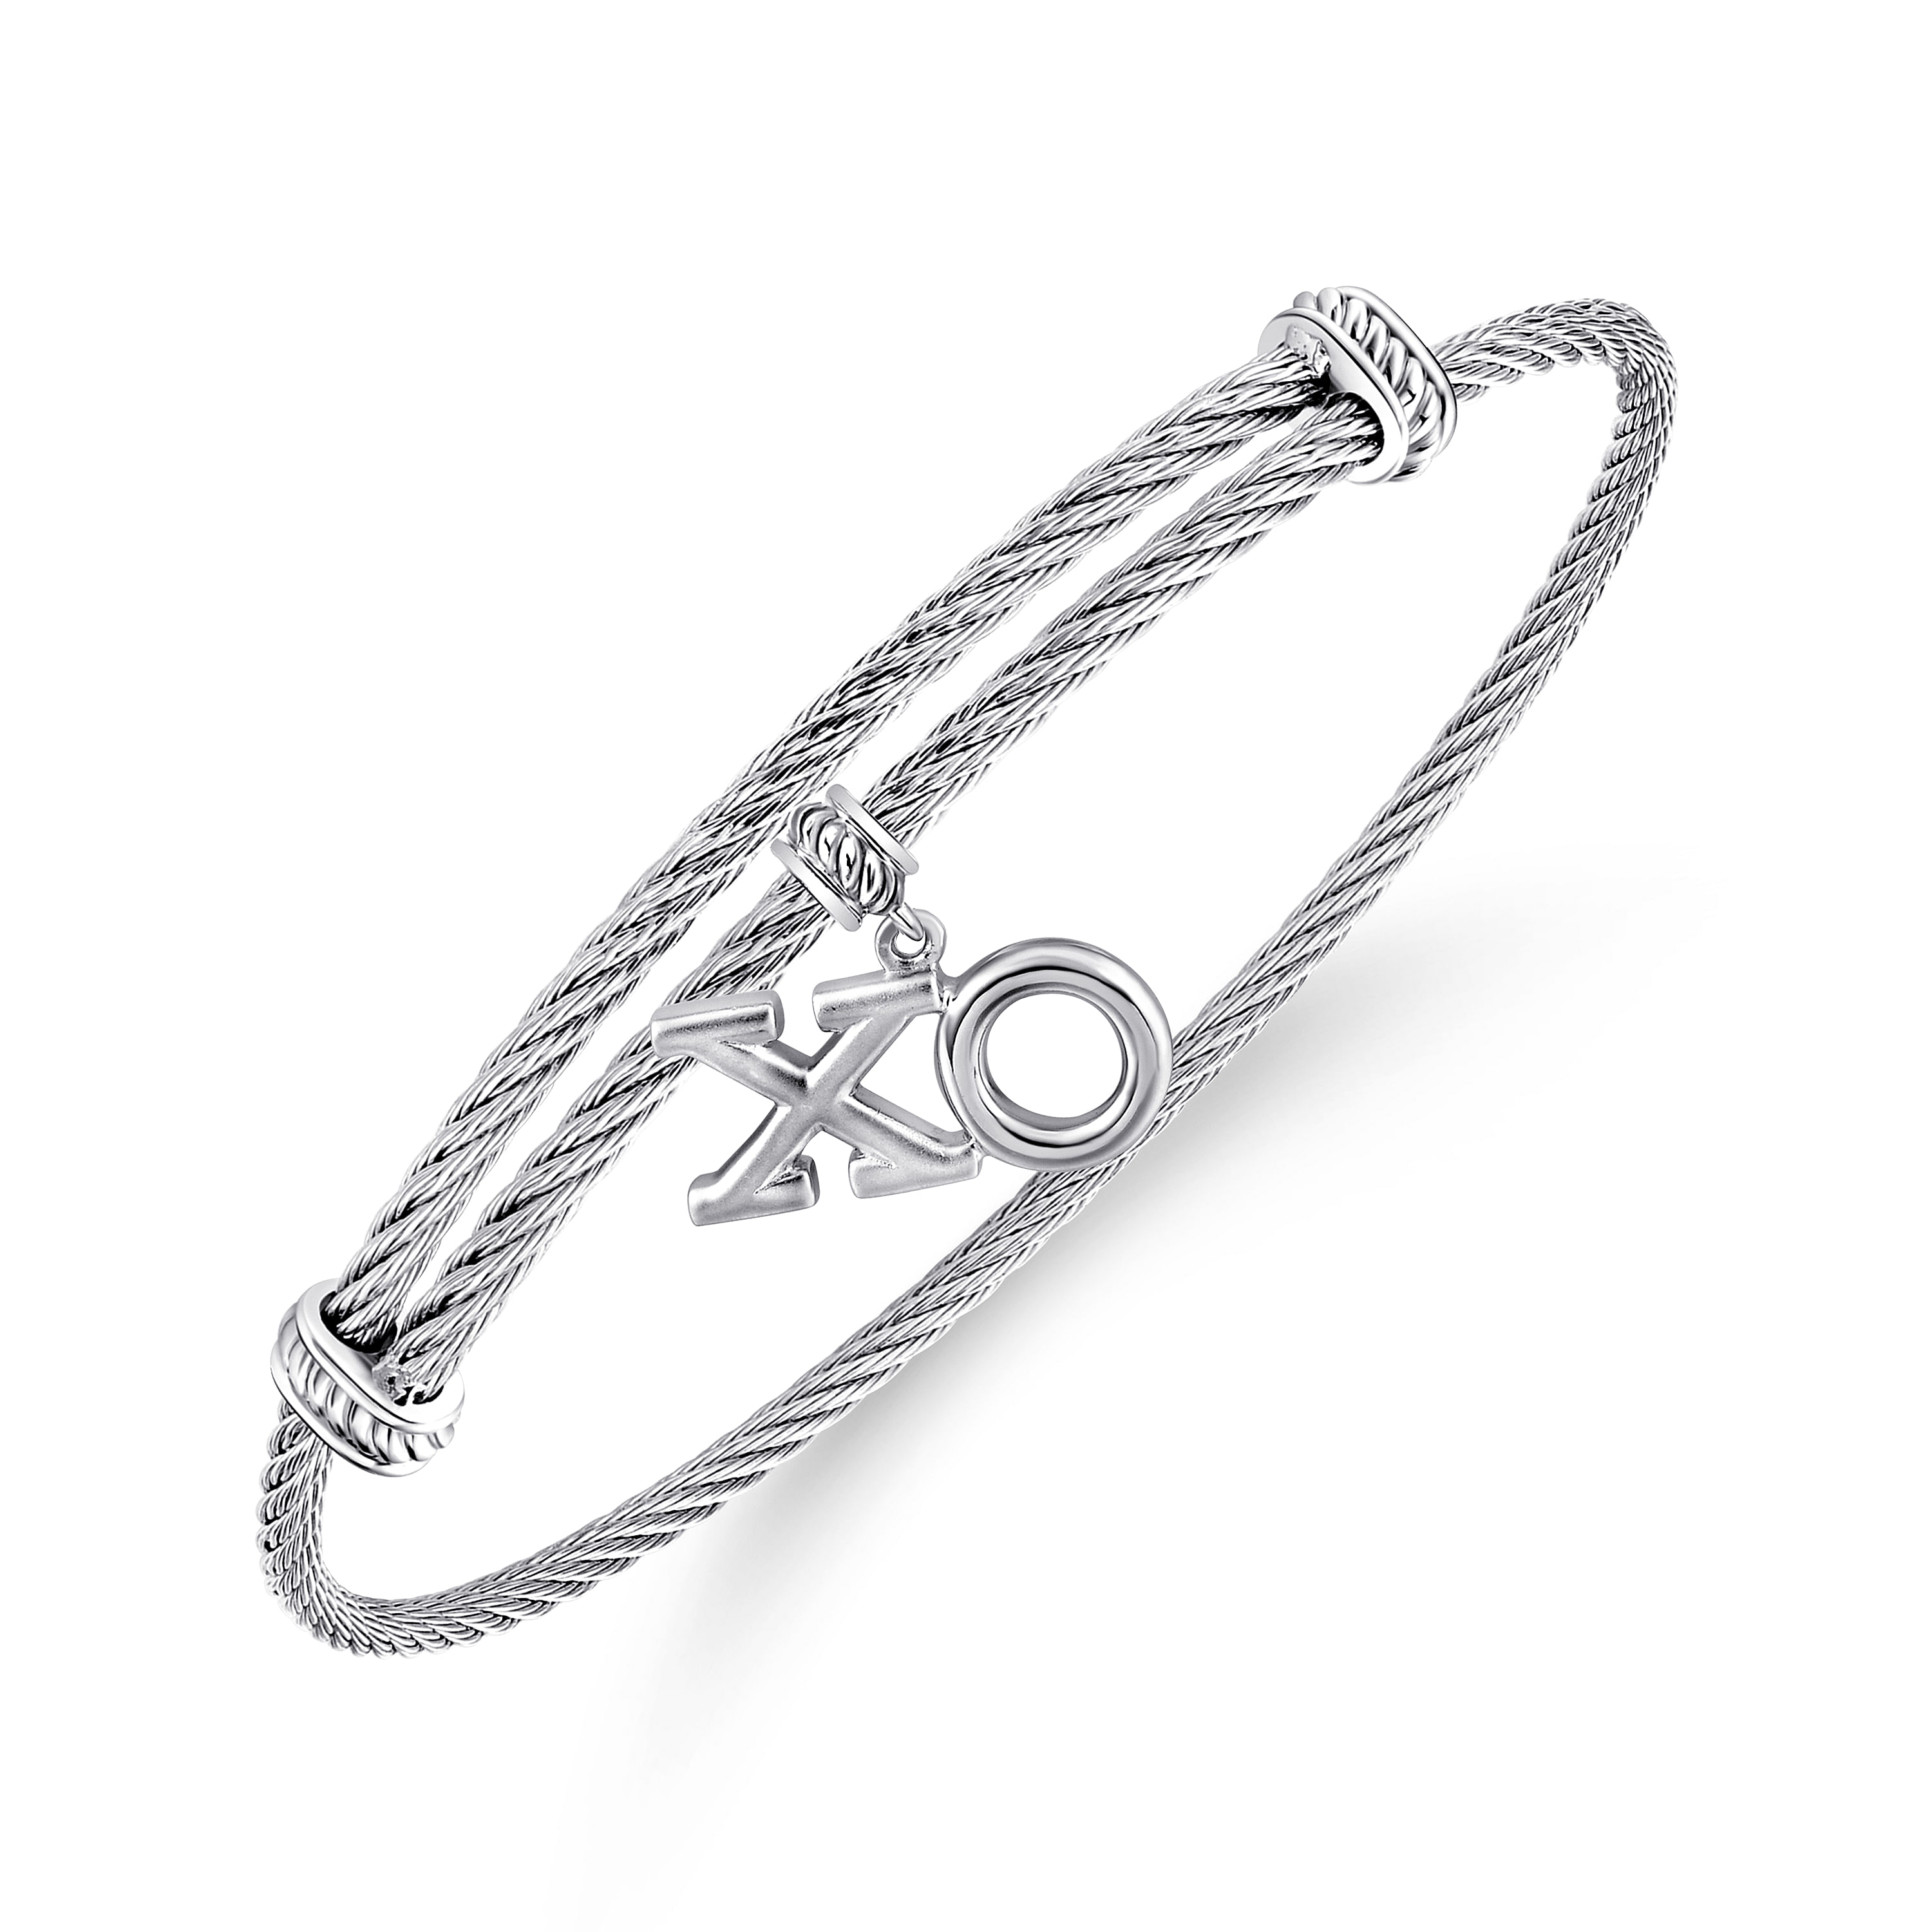 Adjustable Twisted Cable Stainless Steel Bangle with Sterling Silver XO Charm